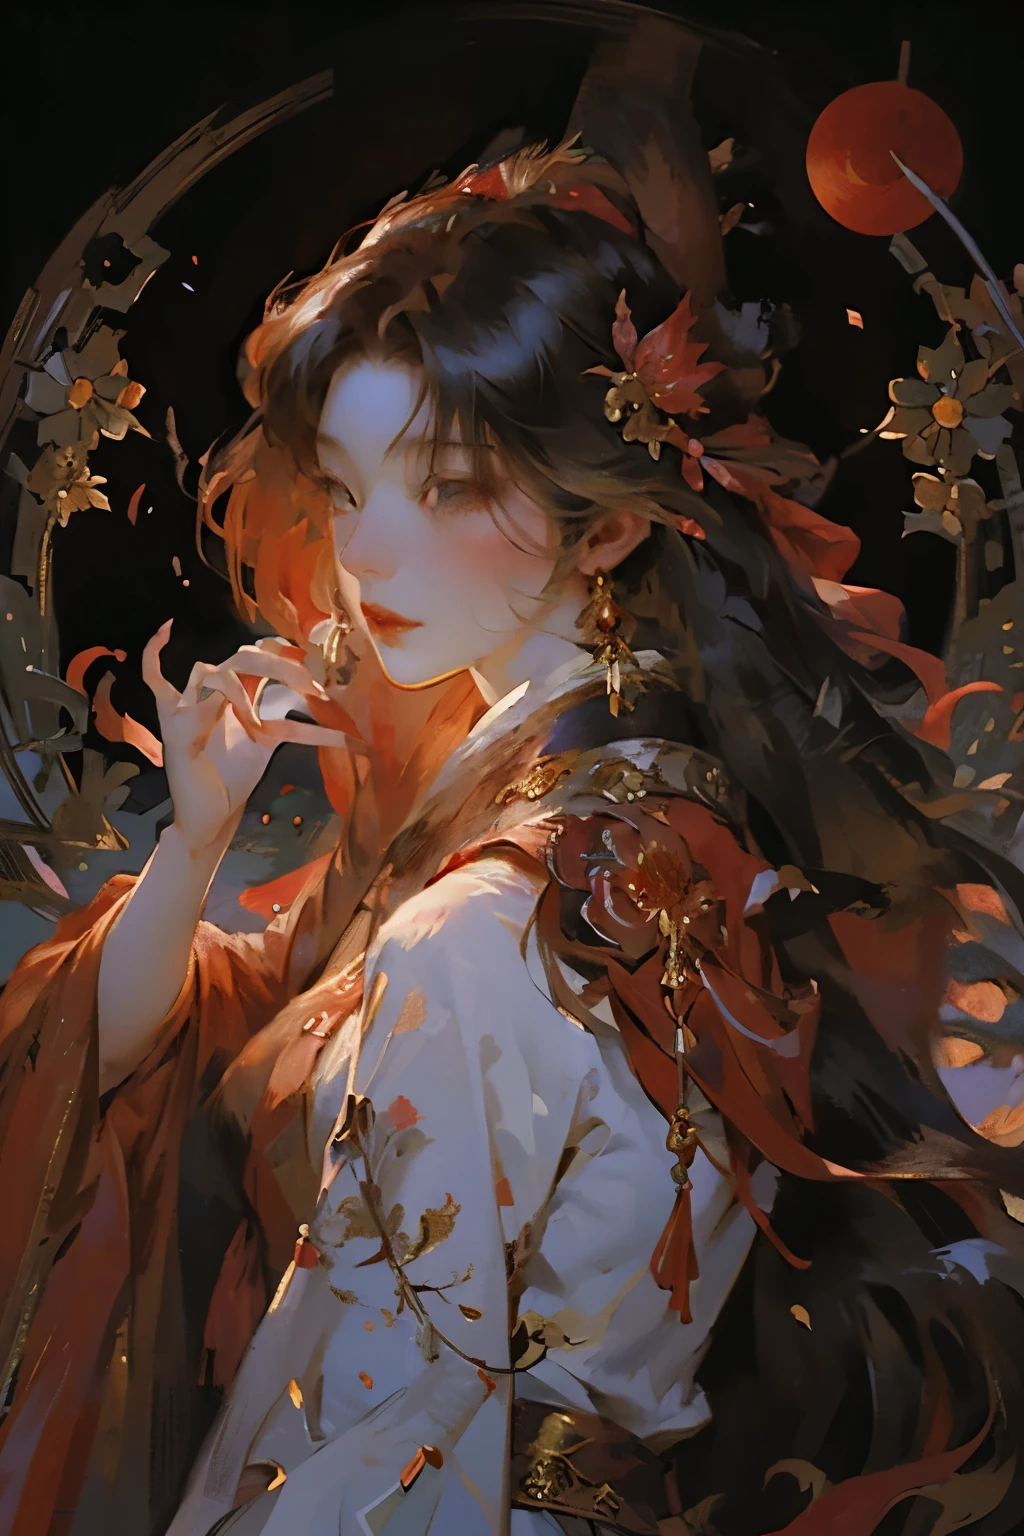 Exquisite facial features，one wearing red clothes、Close-up of woman wearing red scarf, Korean Art Nouveau Animation, anime art nouveau, Alphonse Mucha and Rose Drews, beautiful digital illustration, the goddess of autumn harvest, goddess of autumn, Inspired by Alphonse Mucha, beautiful anime artwork, sailor jupiter. beautiful, Inspired by Yanagawa Shigenobu, Empress Autumn
